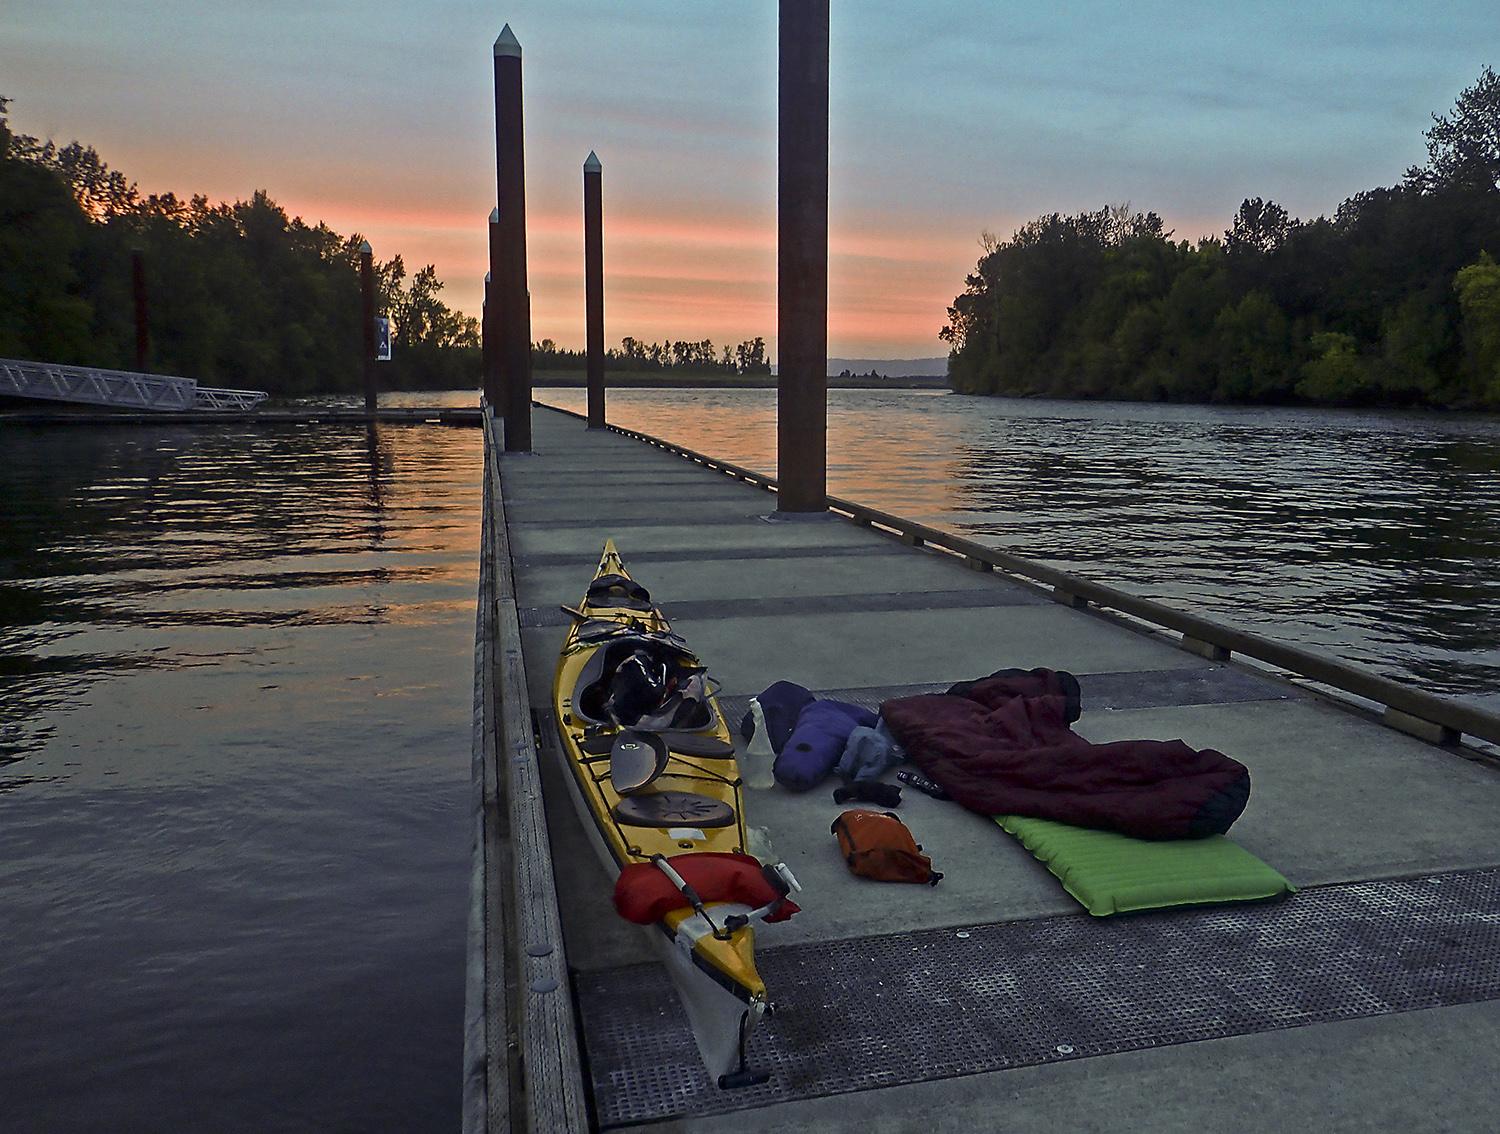 camping on a dock at sunset, sleeping bag and other affects laid out by kayak